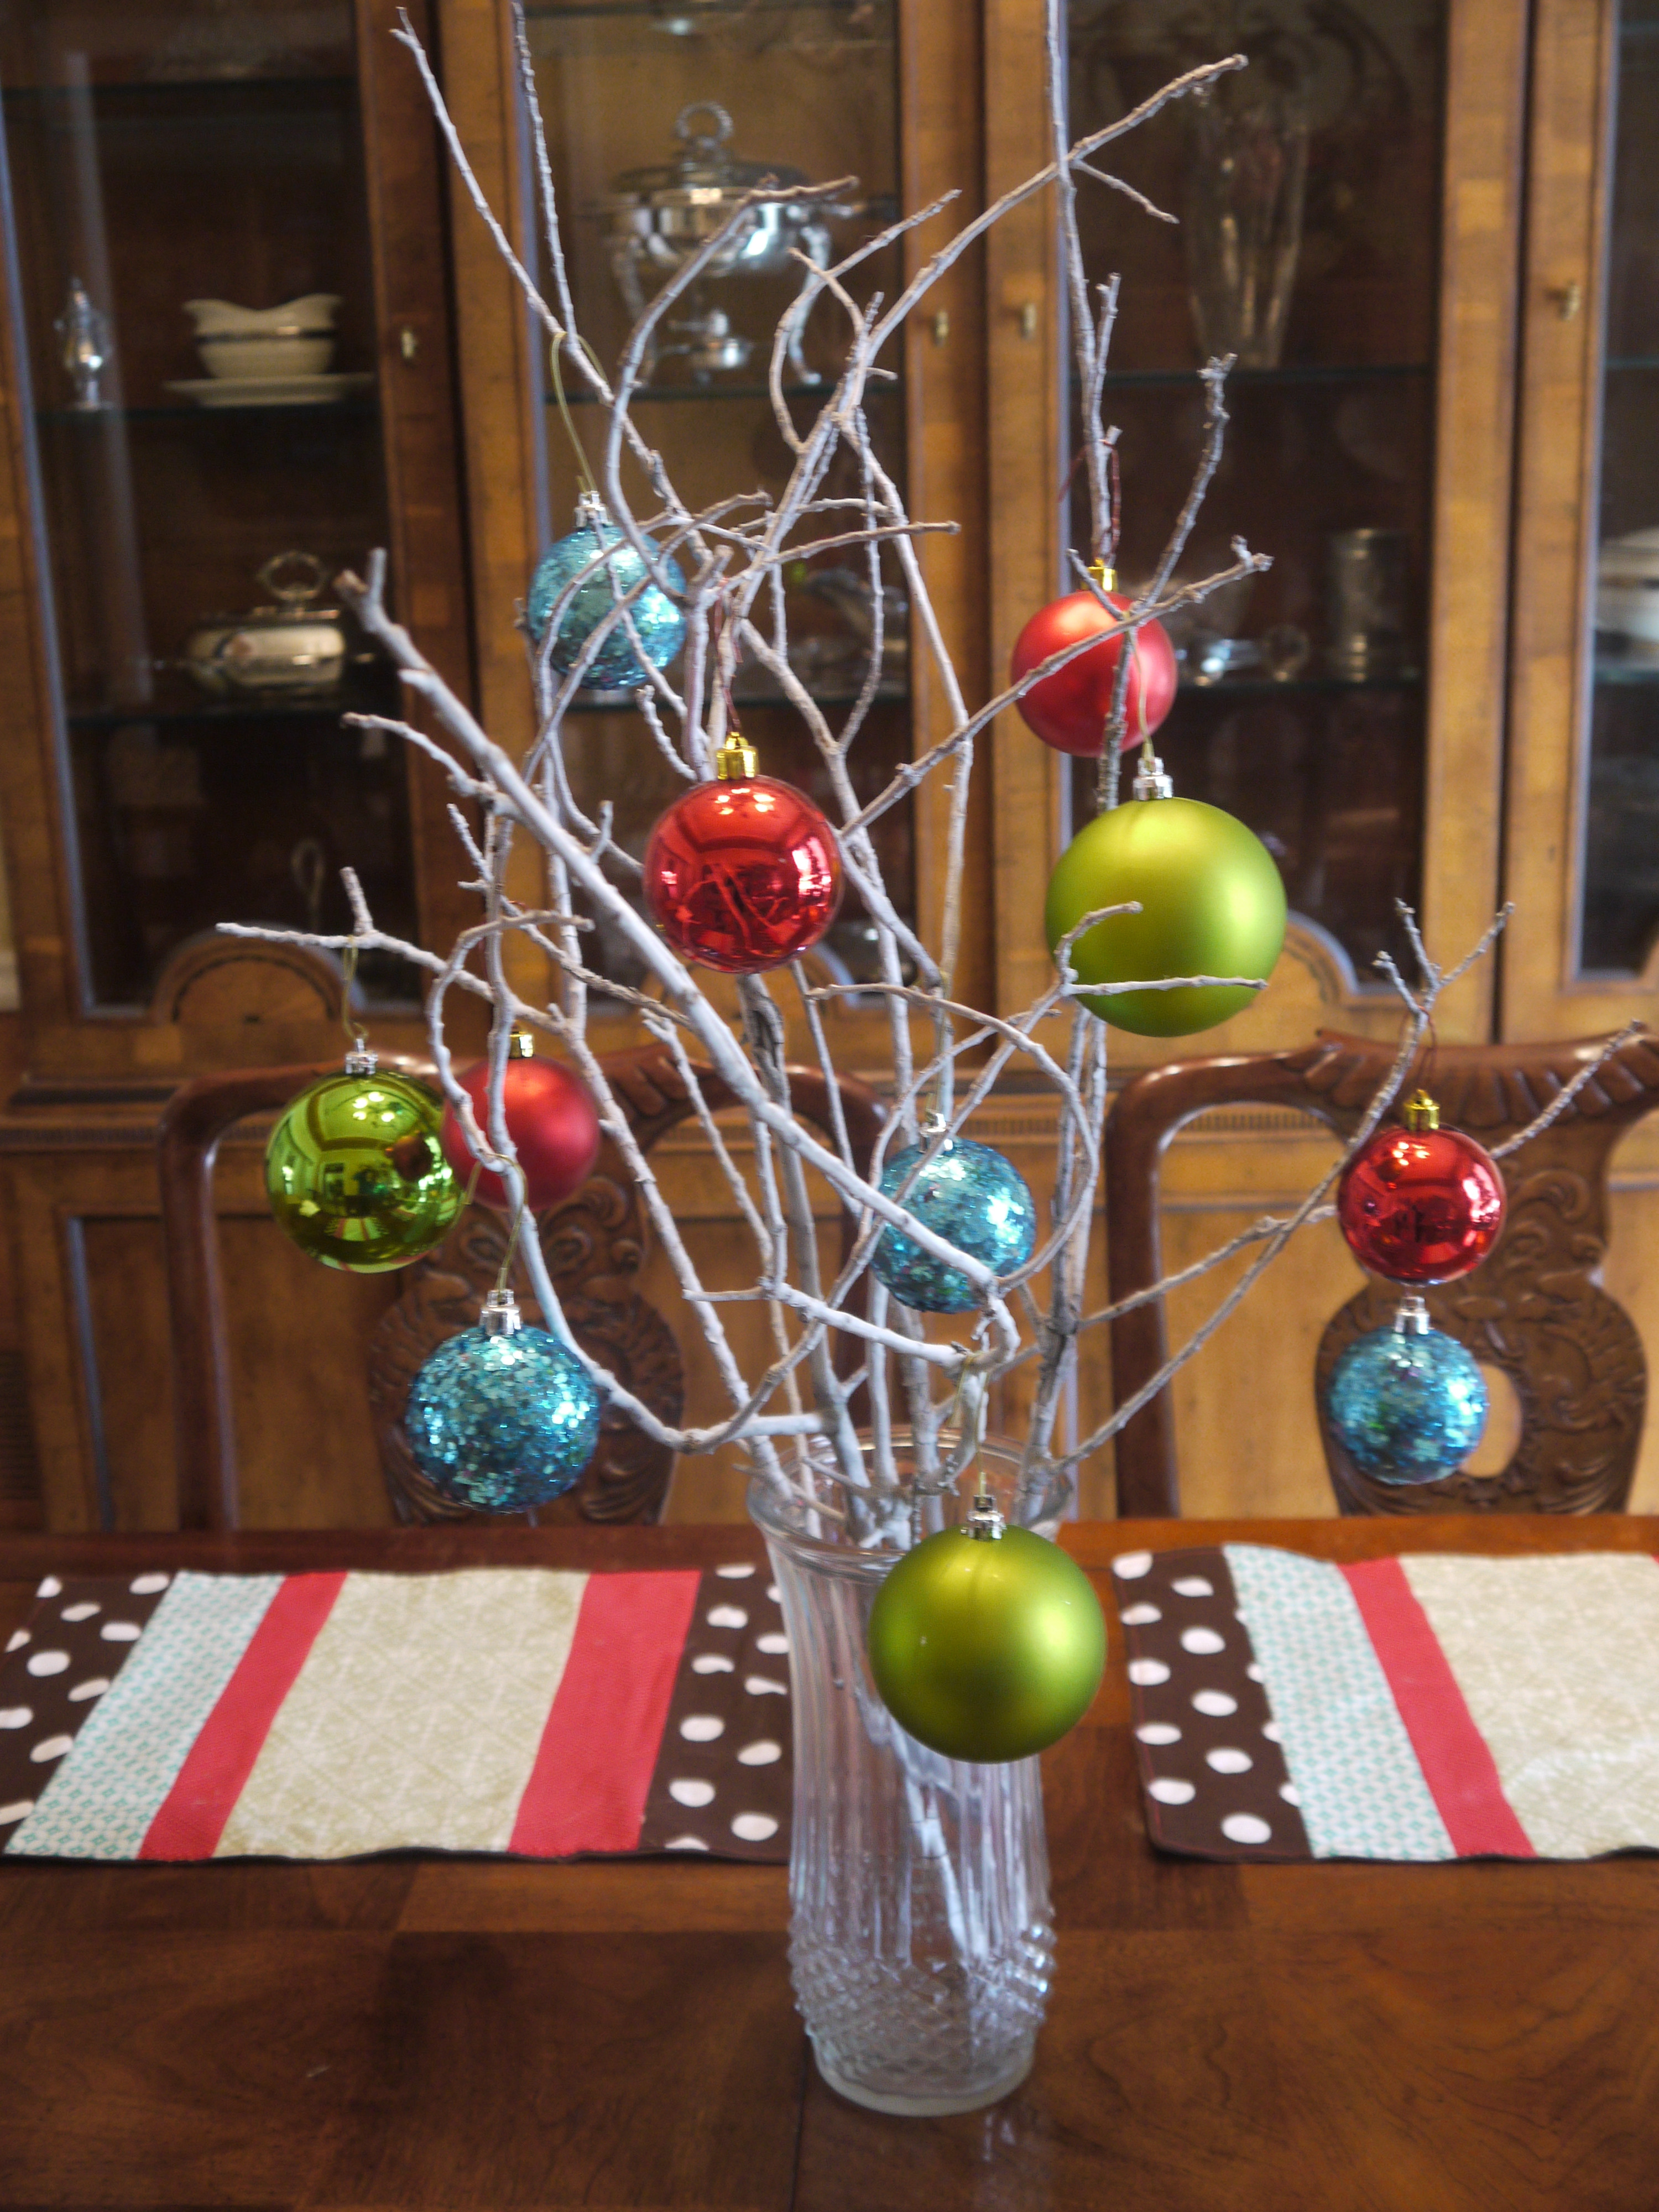 Christmas Decoration Ideas DIY
 70 Christmas Decorations Ideas To Try This Year A DIY